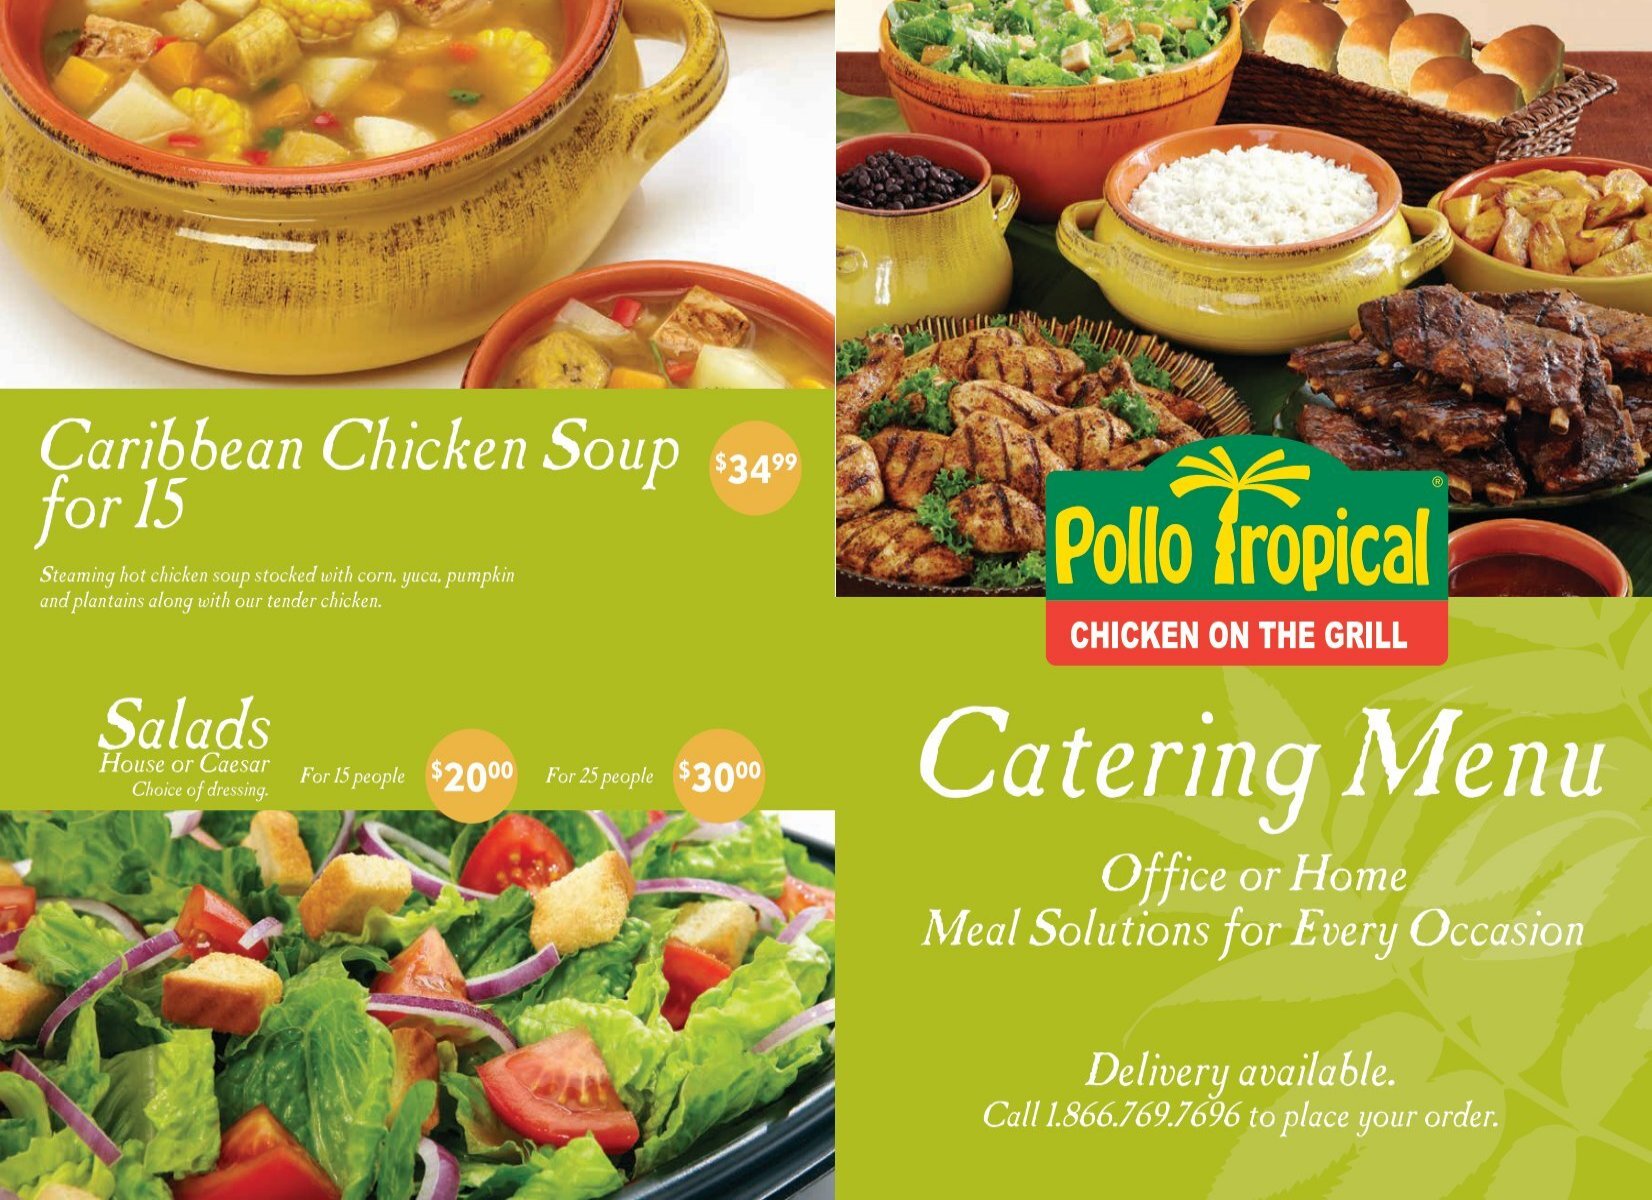 pollo tropical catering